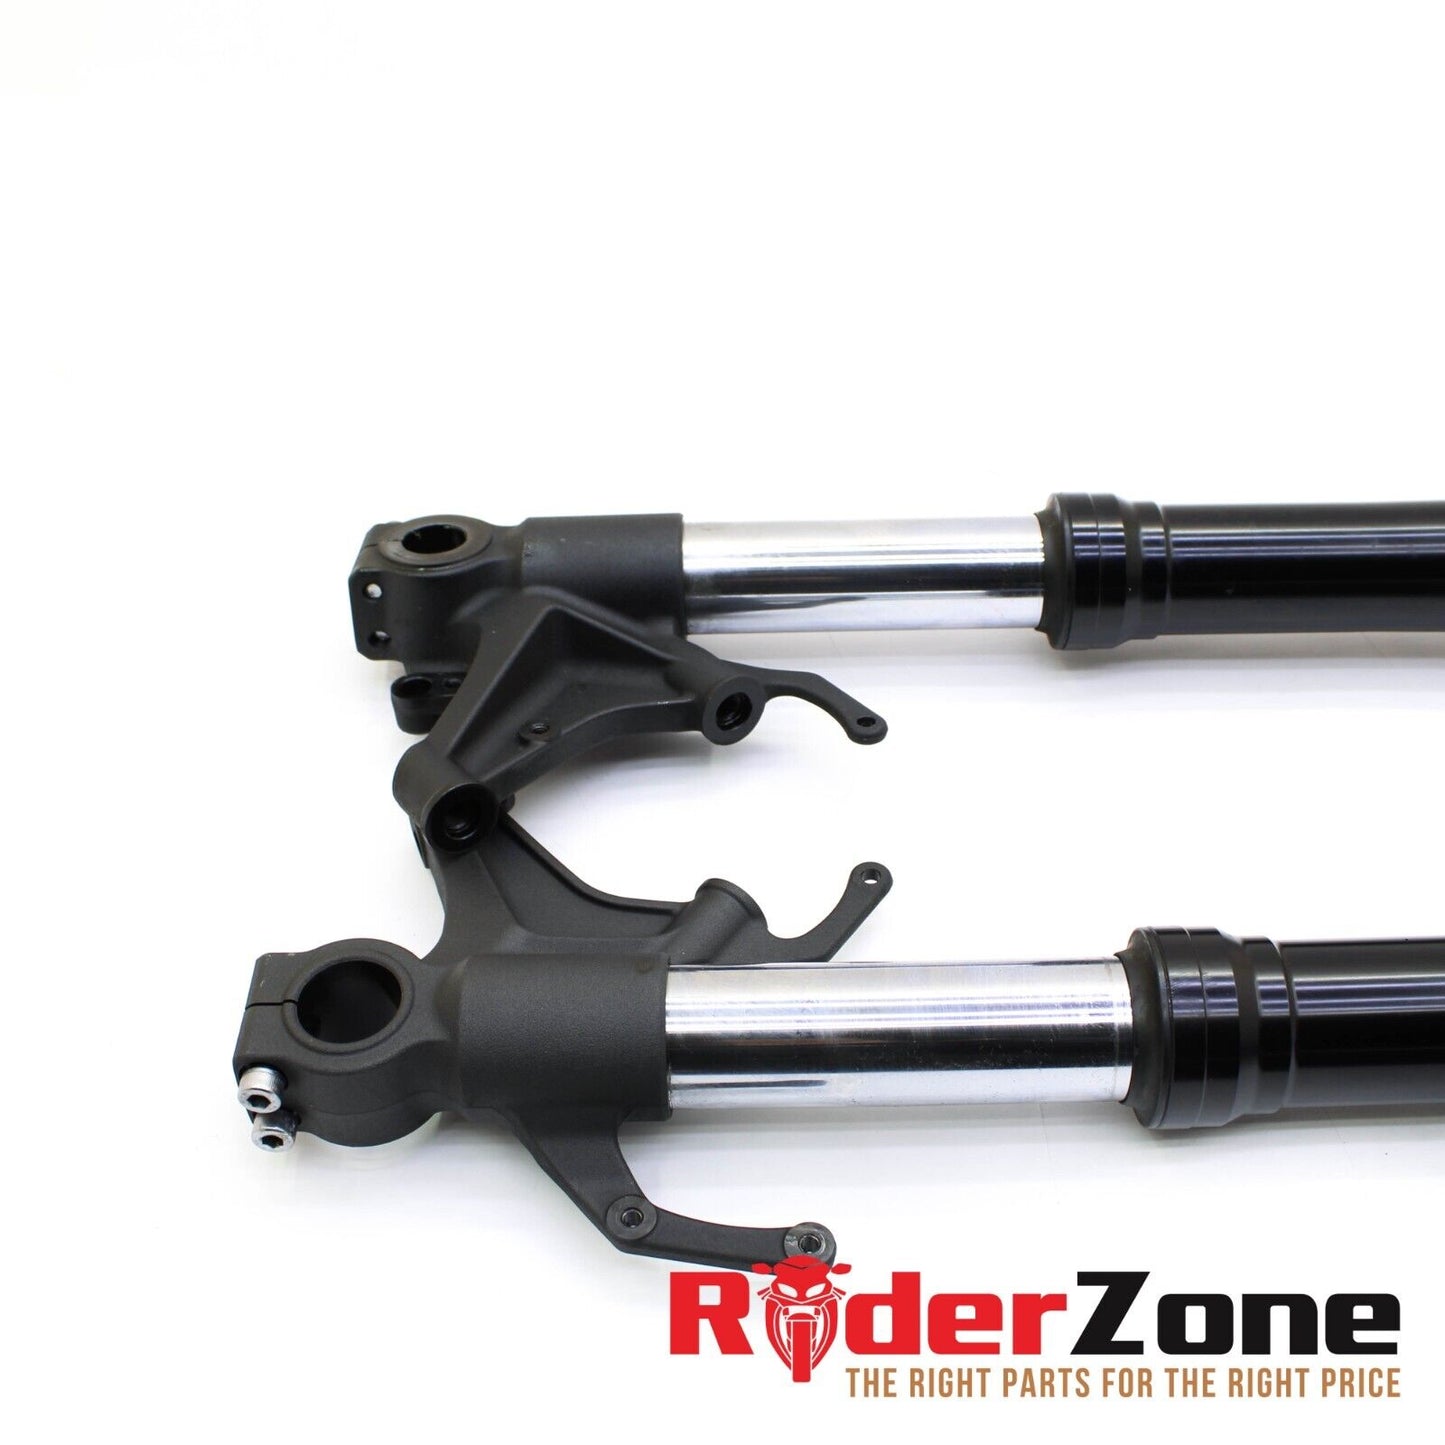 2017 - 2020 YAMAHA YZF R6 FORKS FRONT SUSPENSION TRIPLE TREE LEFT RIGHT LEG KYB